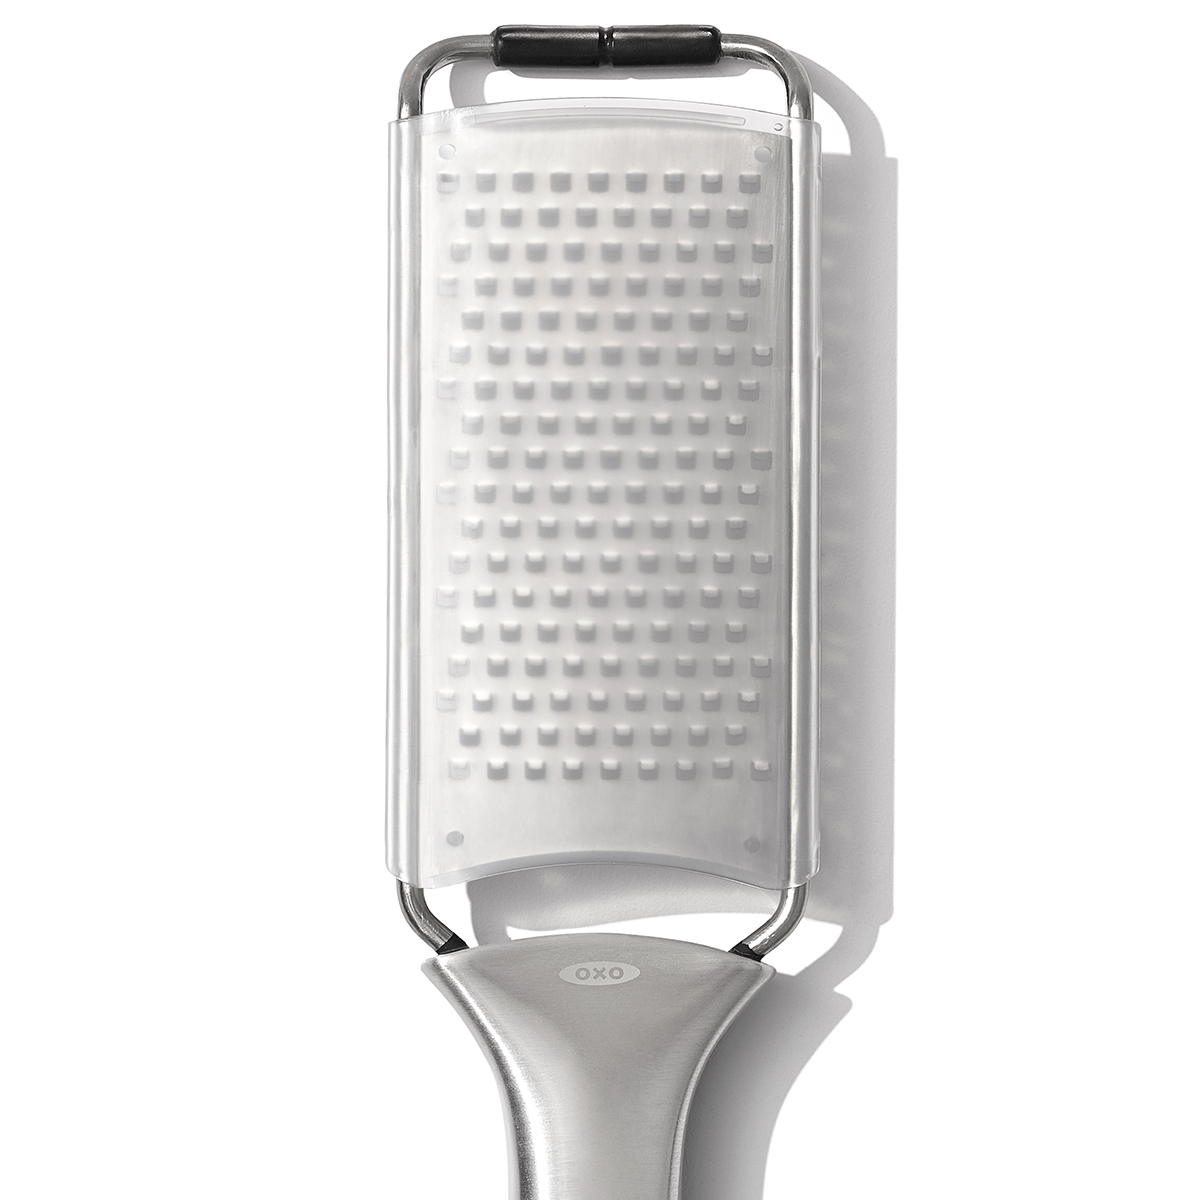 https://www.containerstore.com/catalogimages/425052/10086171-OXO-Steel-Grater-VEN4.jpg